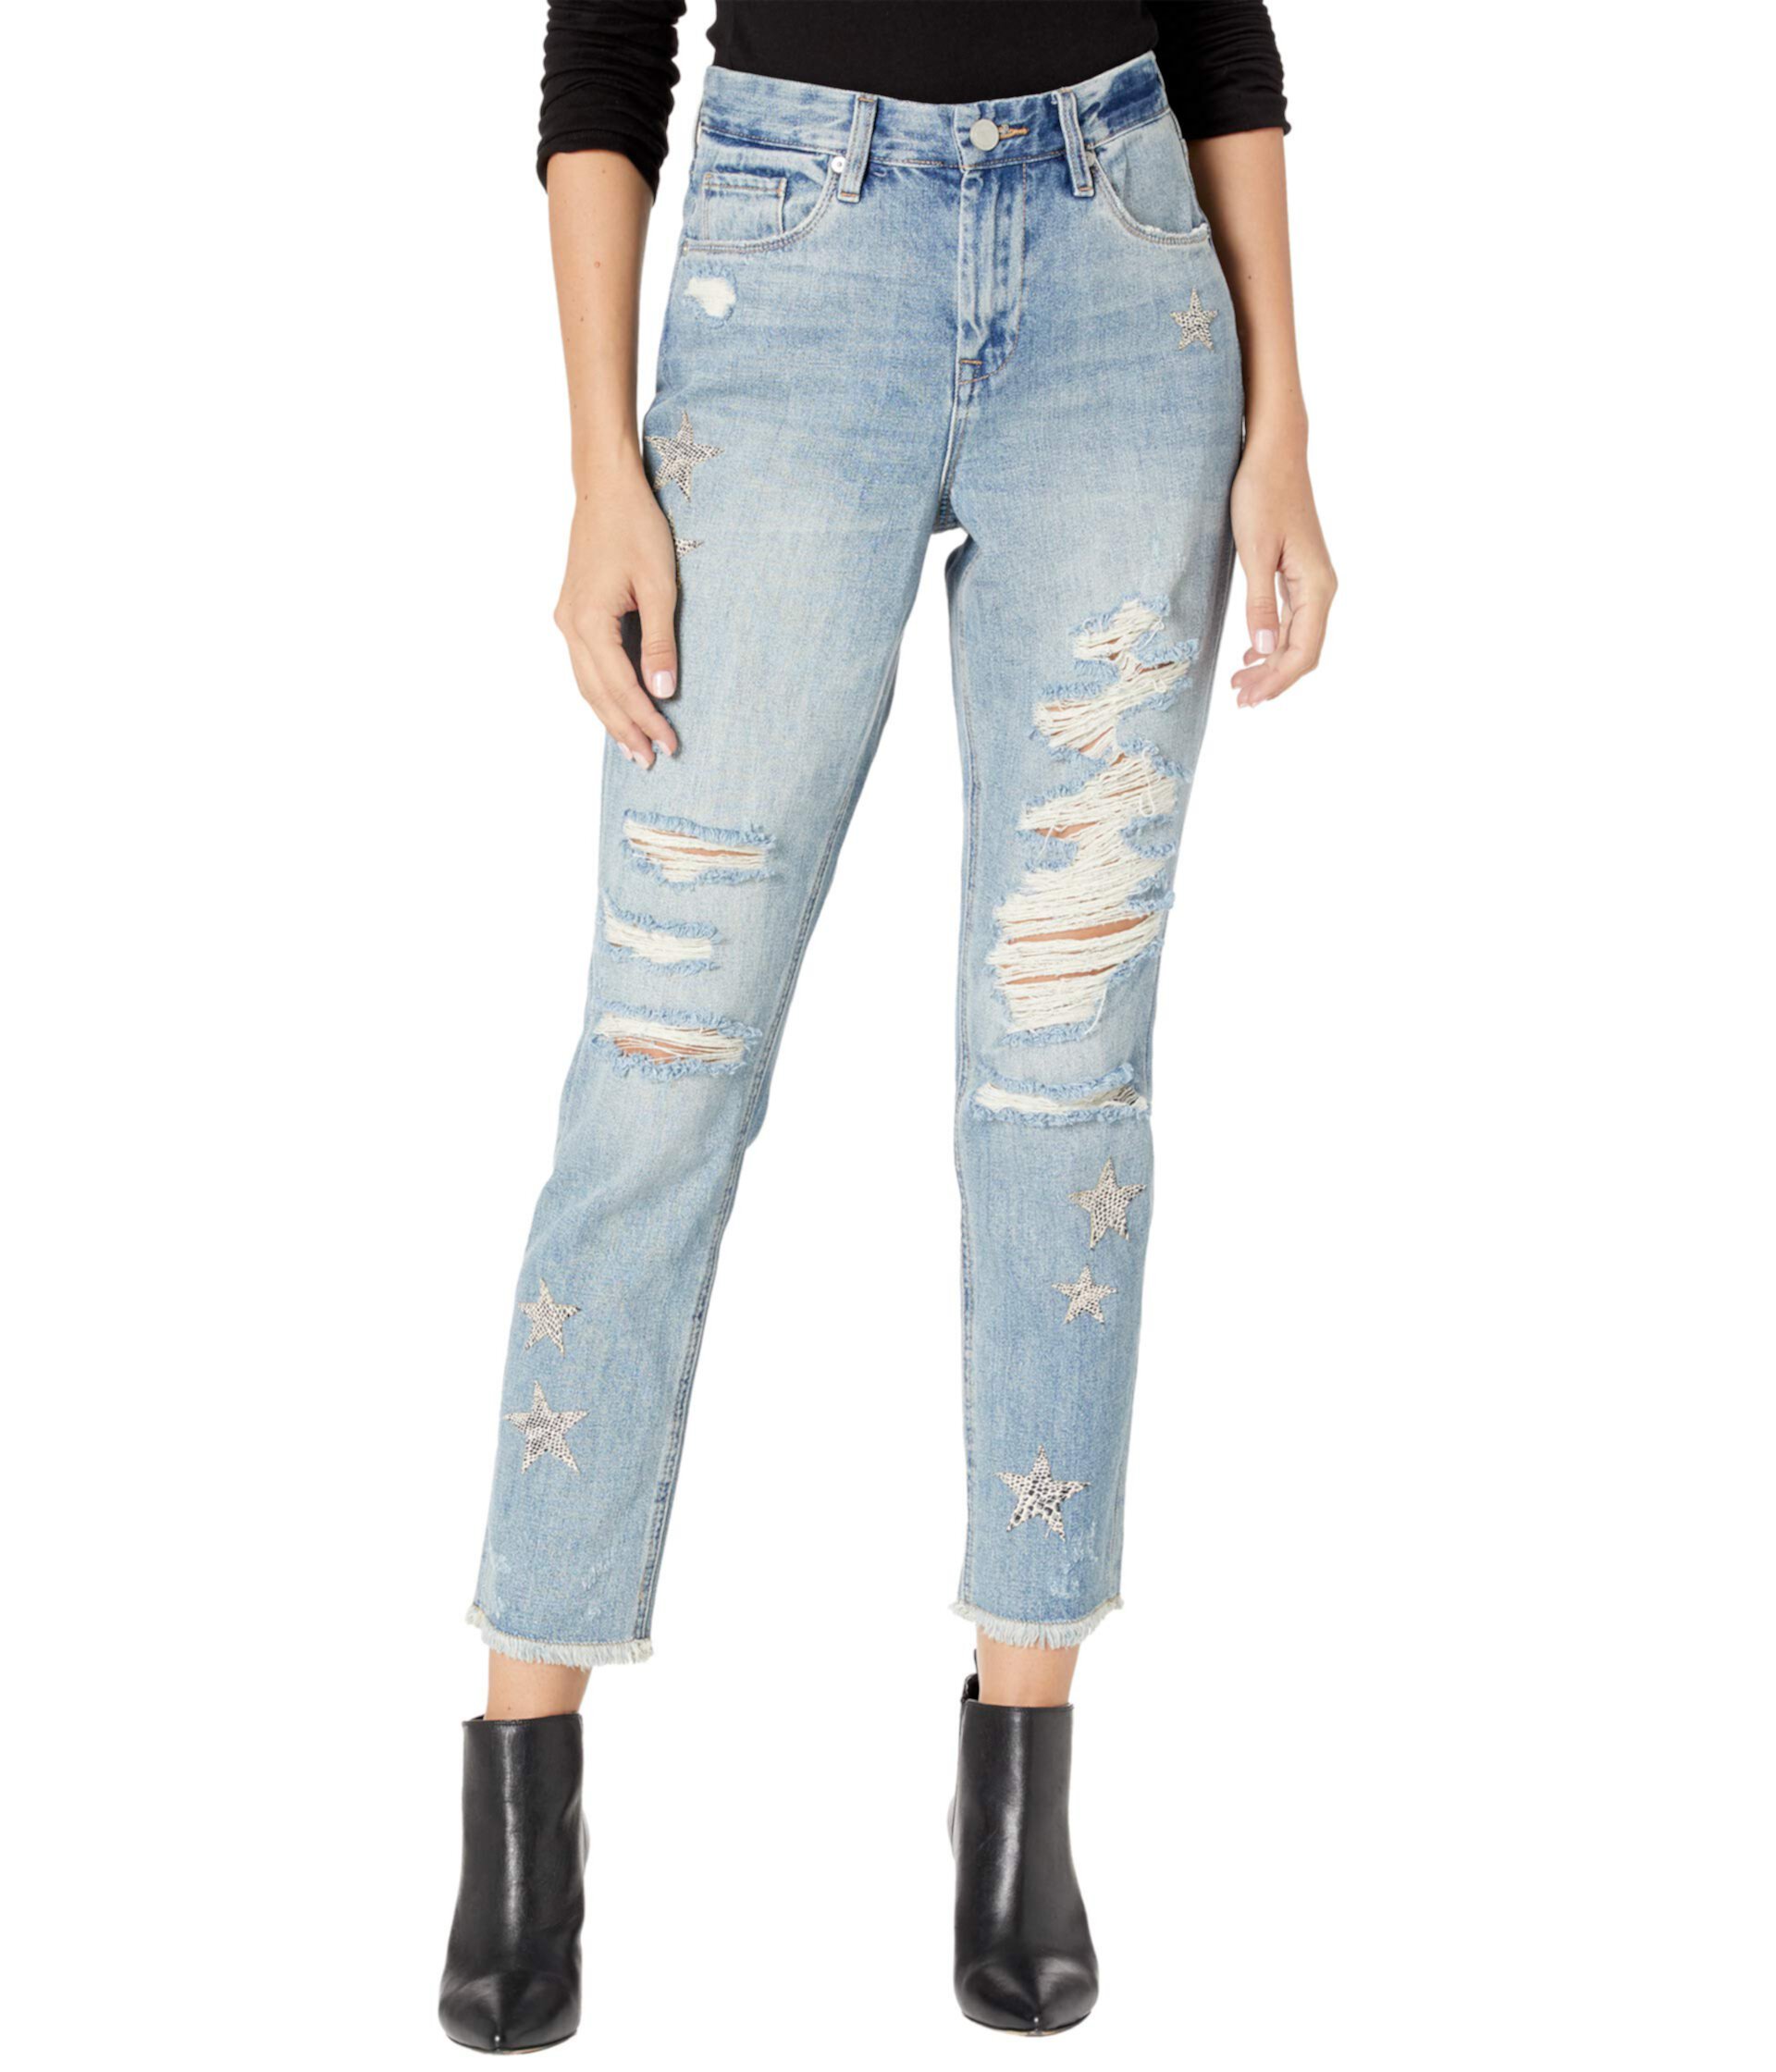 Snake Printed Star Patch Crop Girlfriend Jeans in Star Child Blank NYC